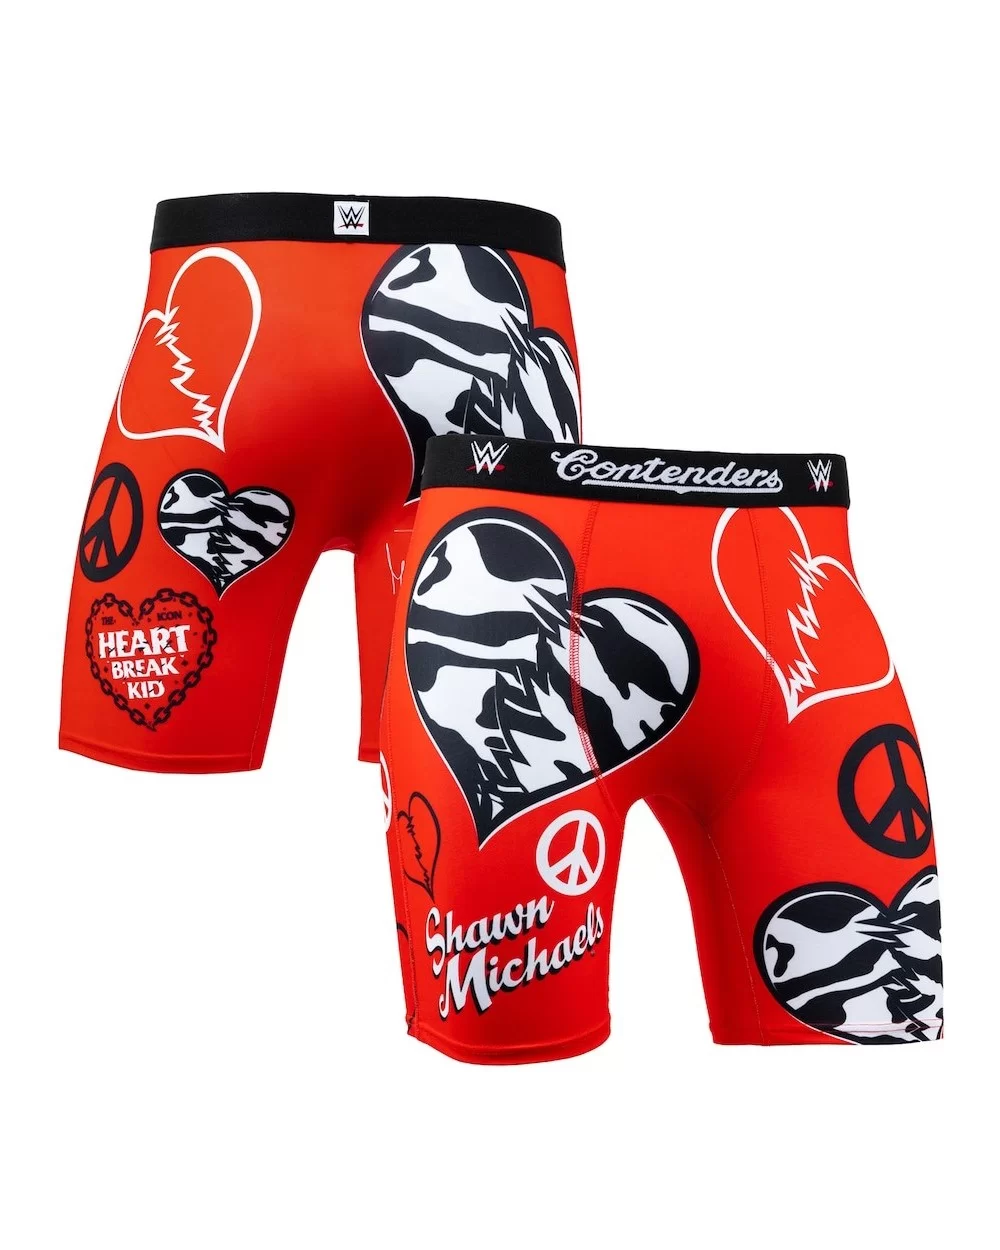 Men's Red Shawn Michaels Contenders Boxer Briefs $7.80 Apparel